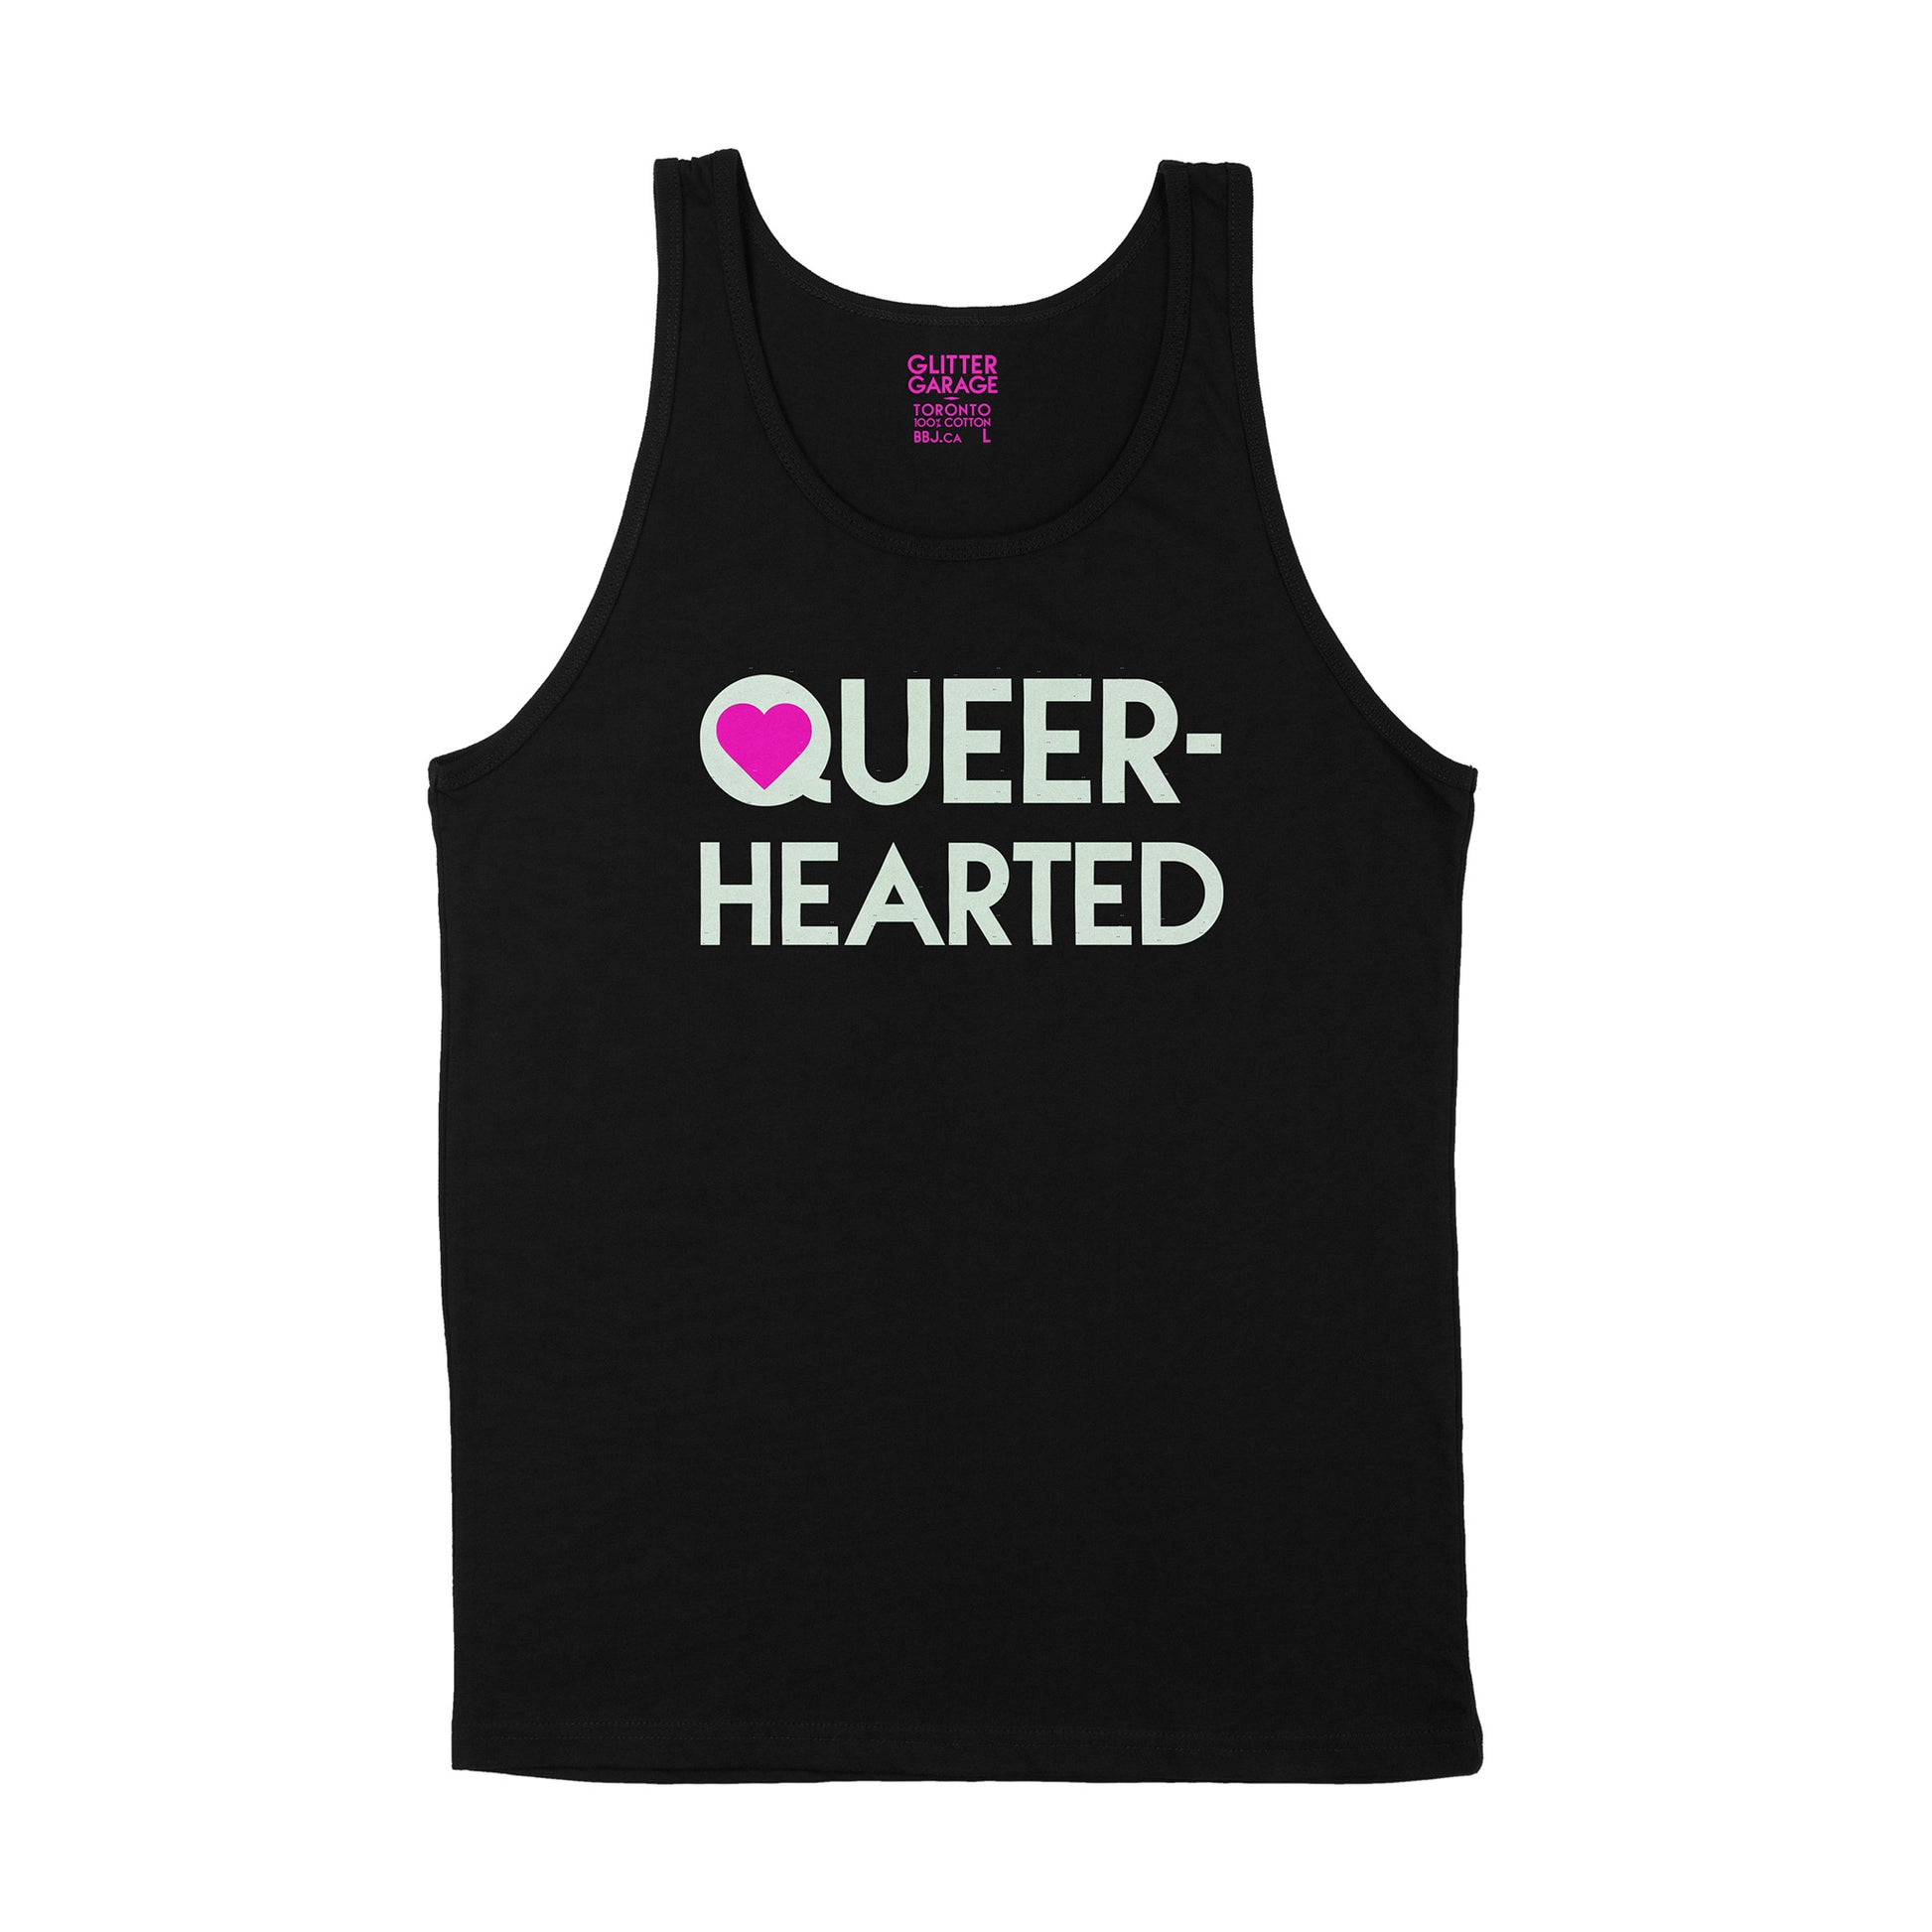 Queer-hearted glow-in-the-dark vinyl text and and neon pink heart on black unisex tank shirt - by BBJ / Glitter Garage